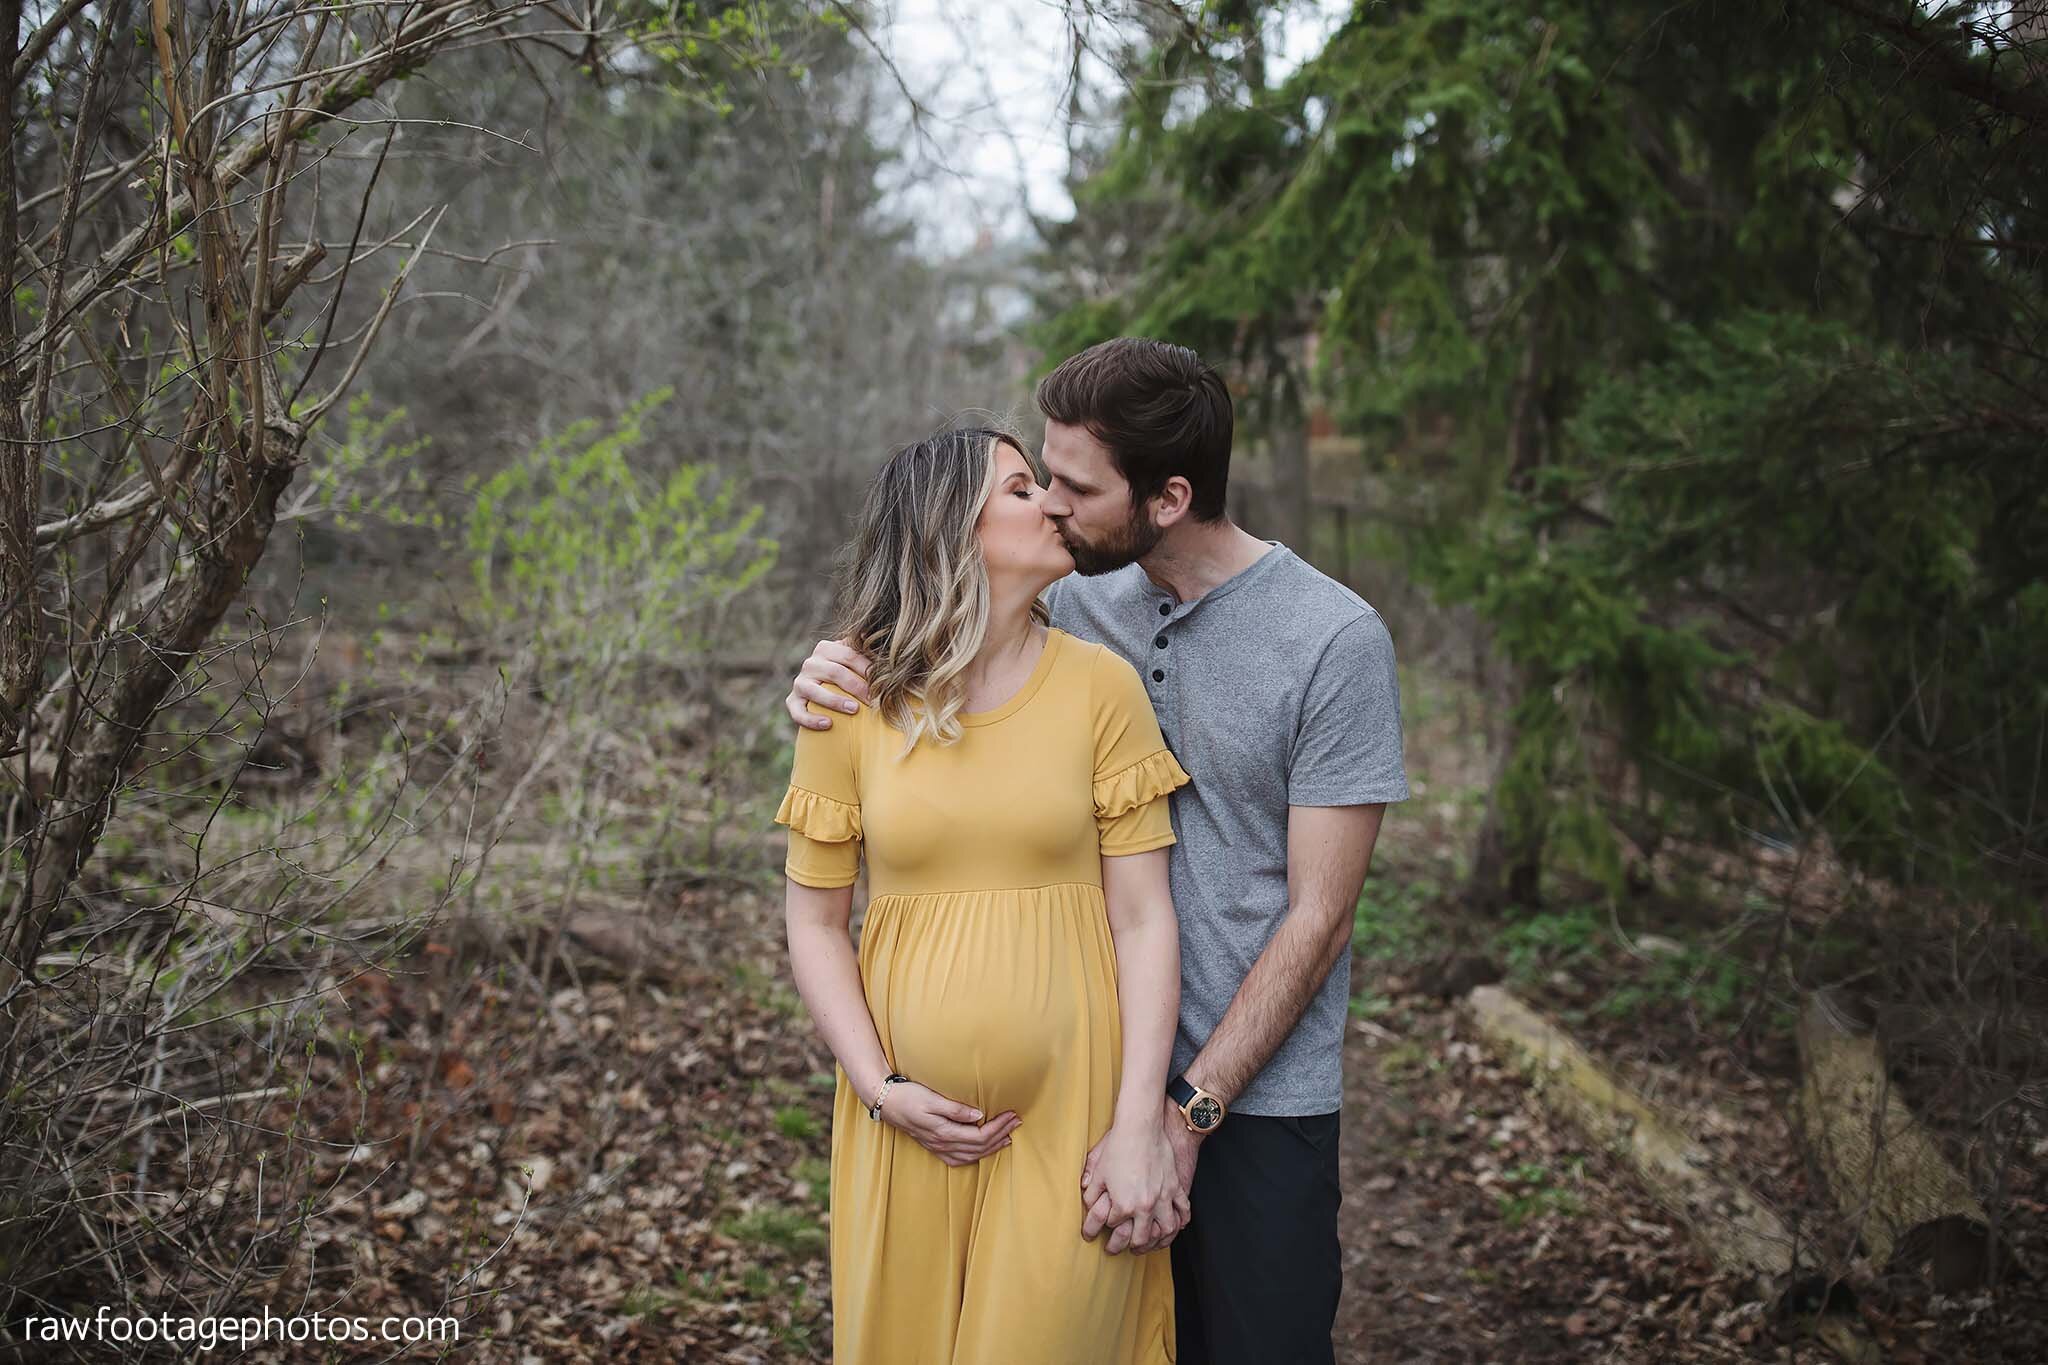 london_ontario_maternity_photographer-raw_footage_photography-in_home_lifestyle_maternity-forest_maternity_session-yellow_maternity_dress_017.jpg